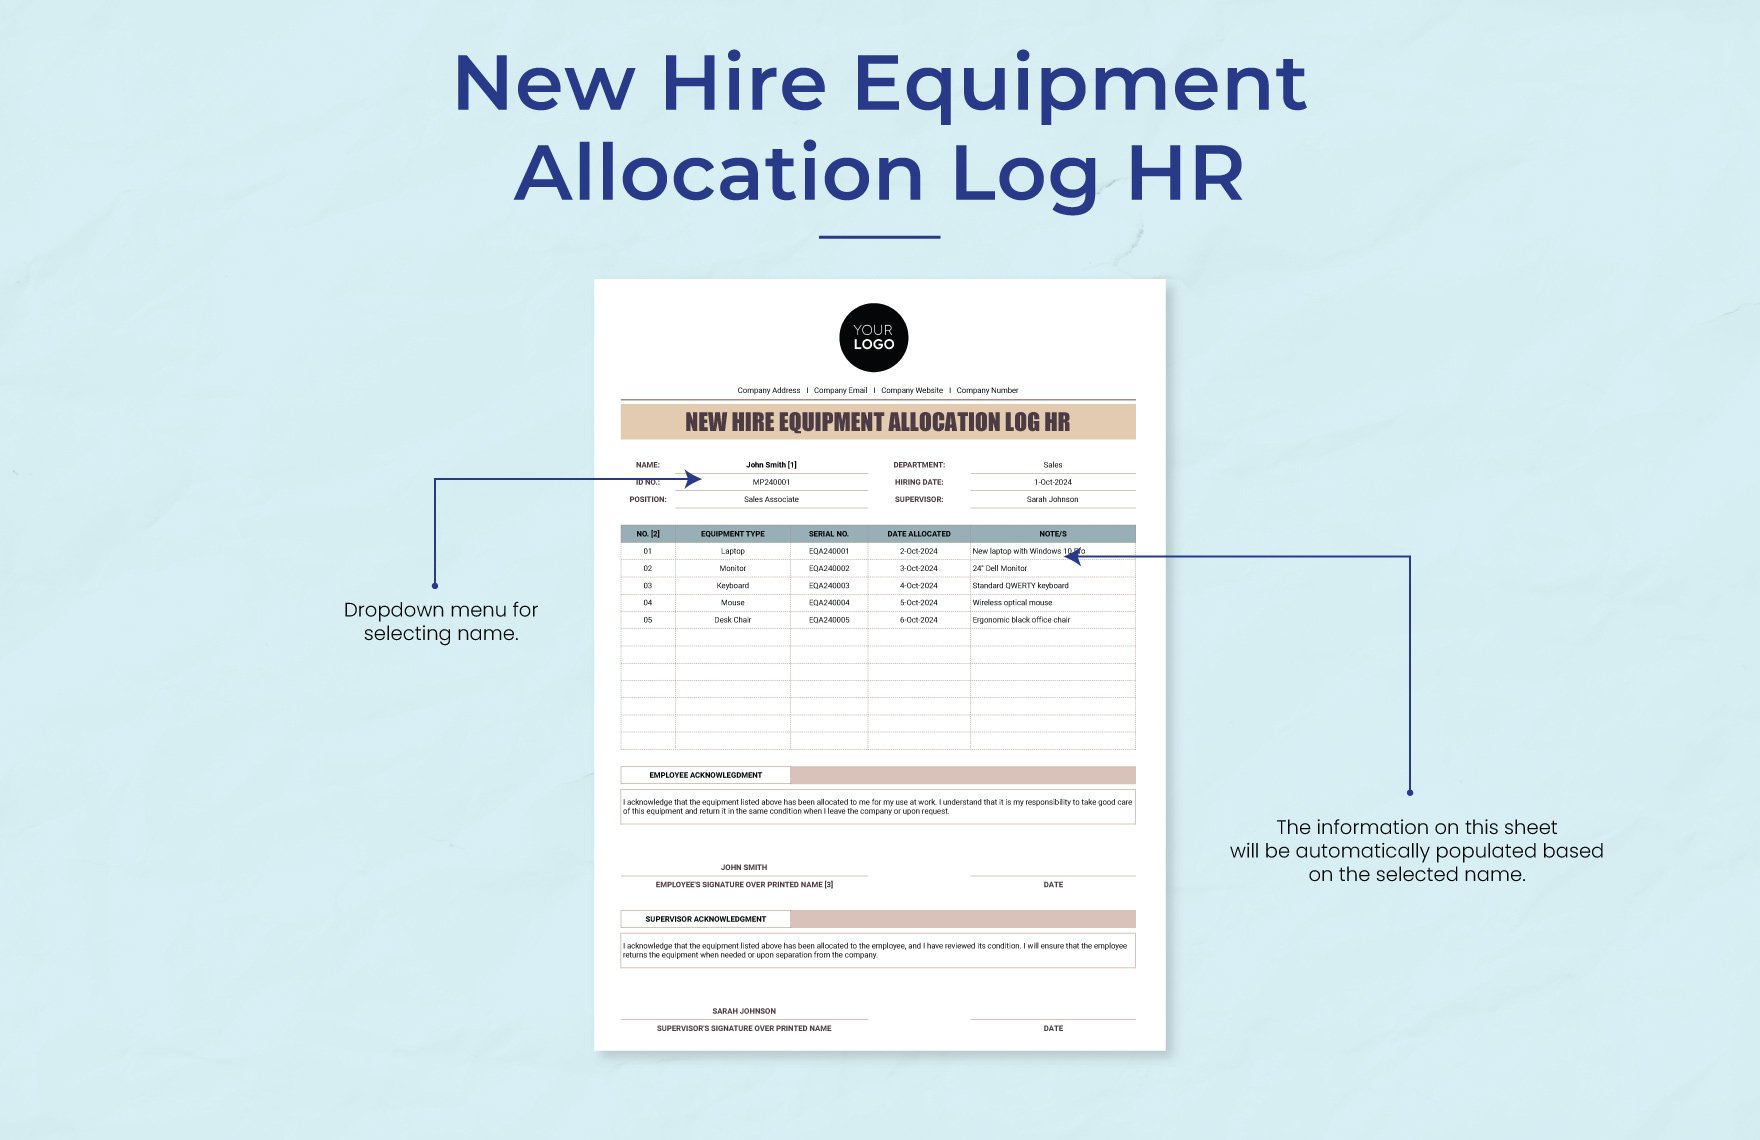 New Hire Equipment Allocation Log HR Template